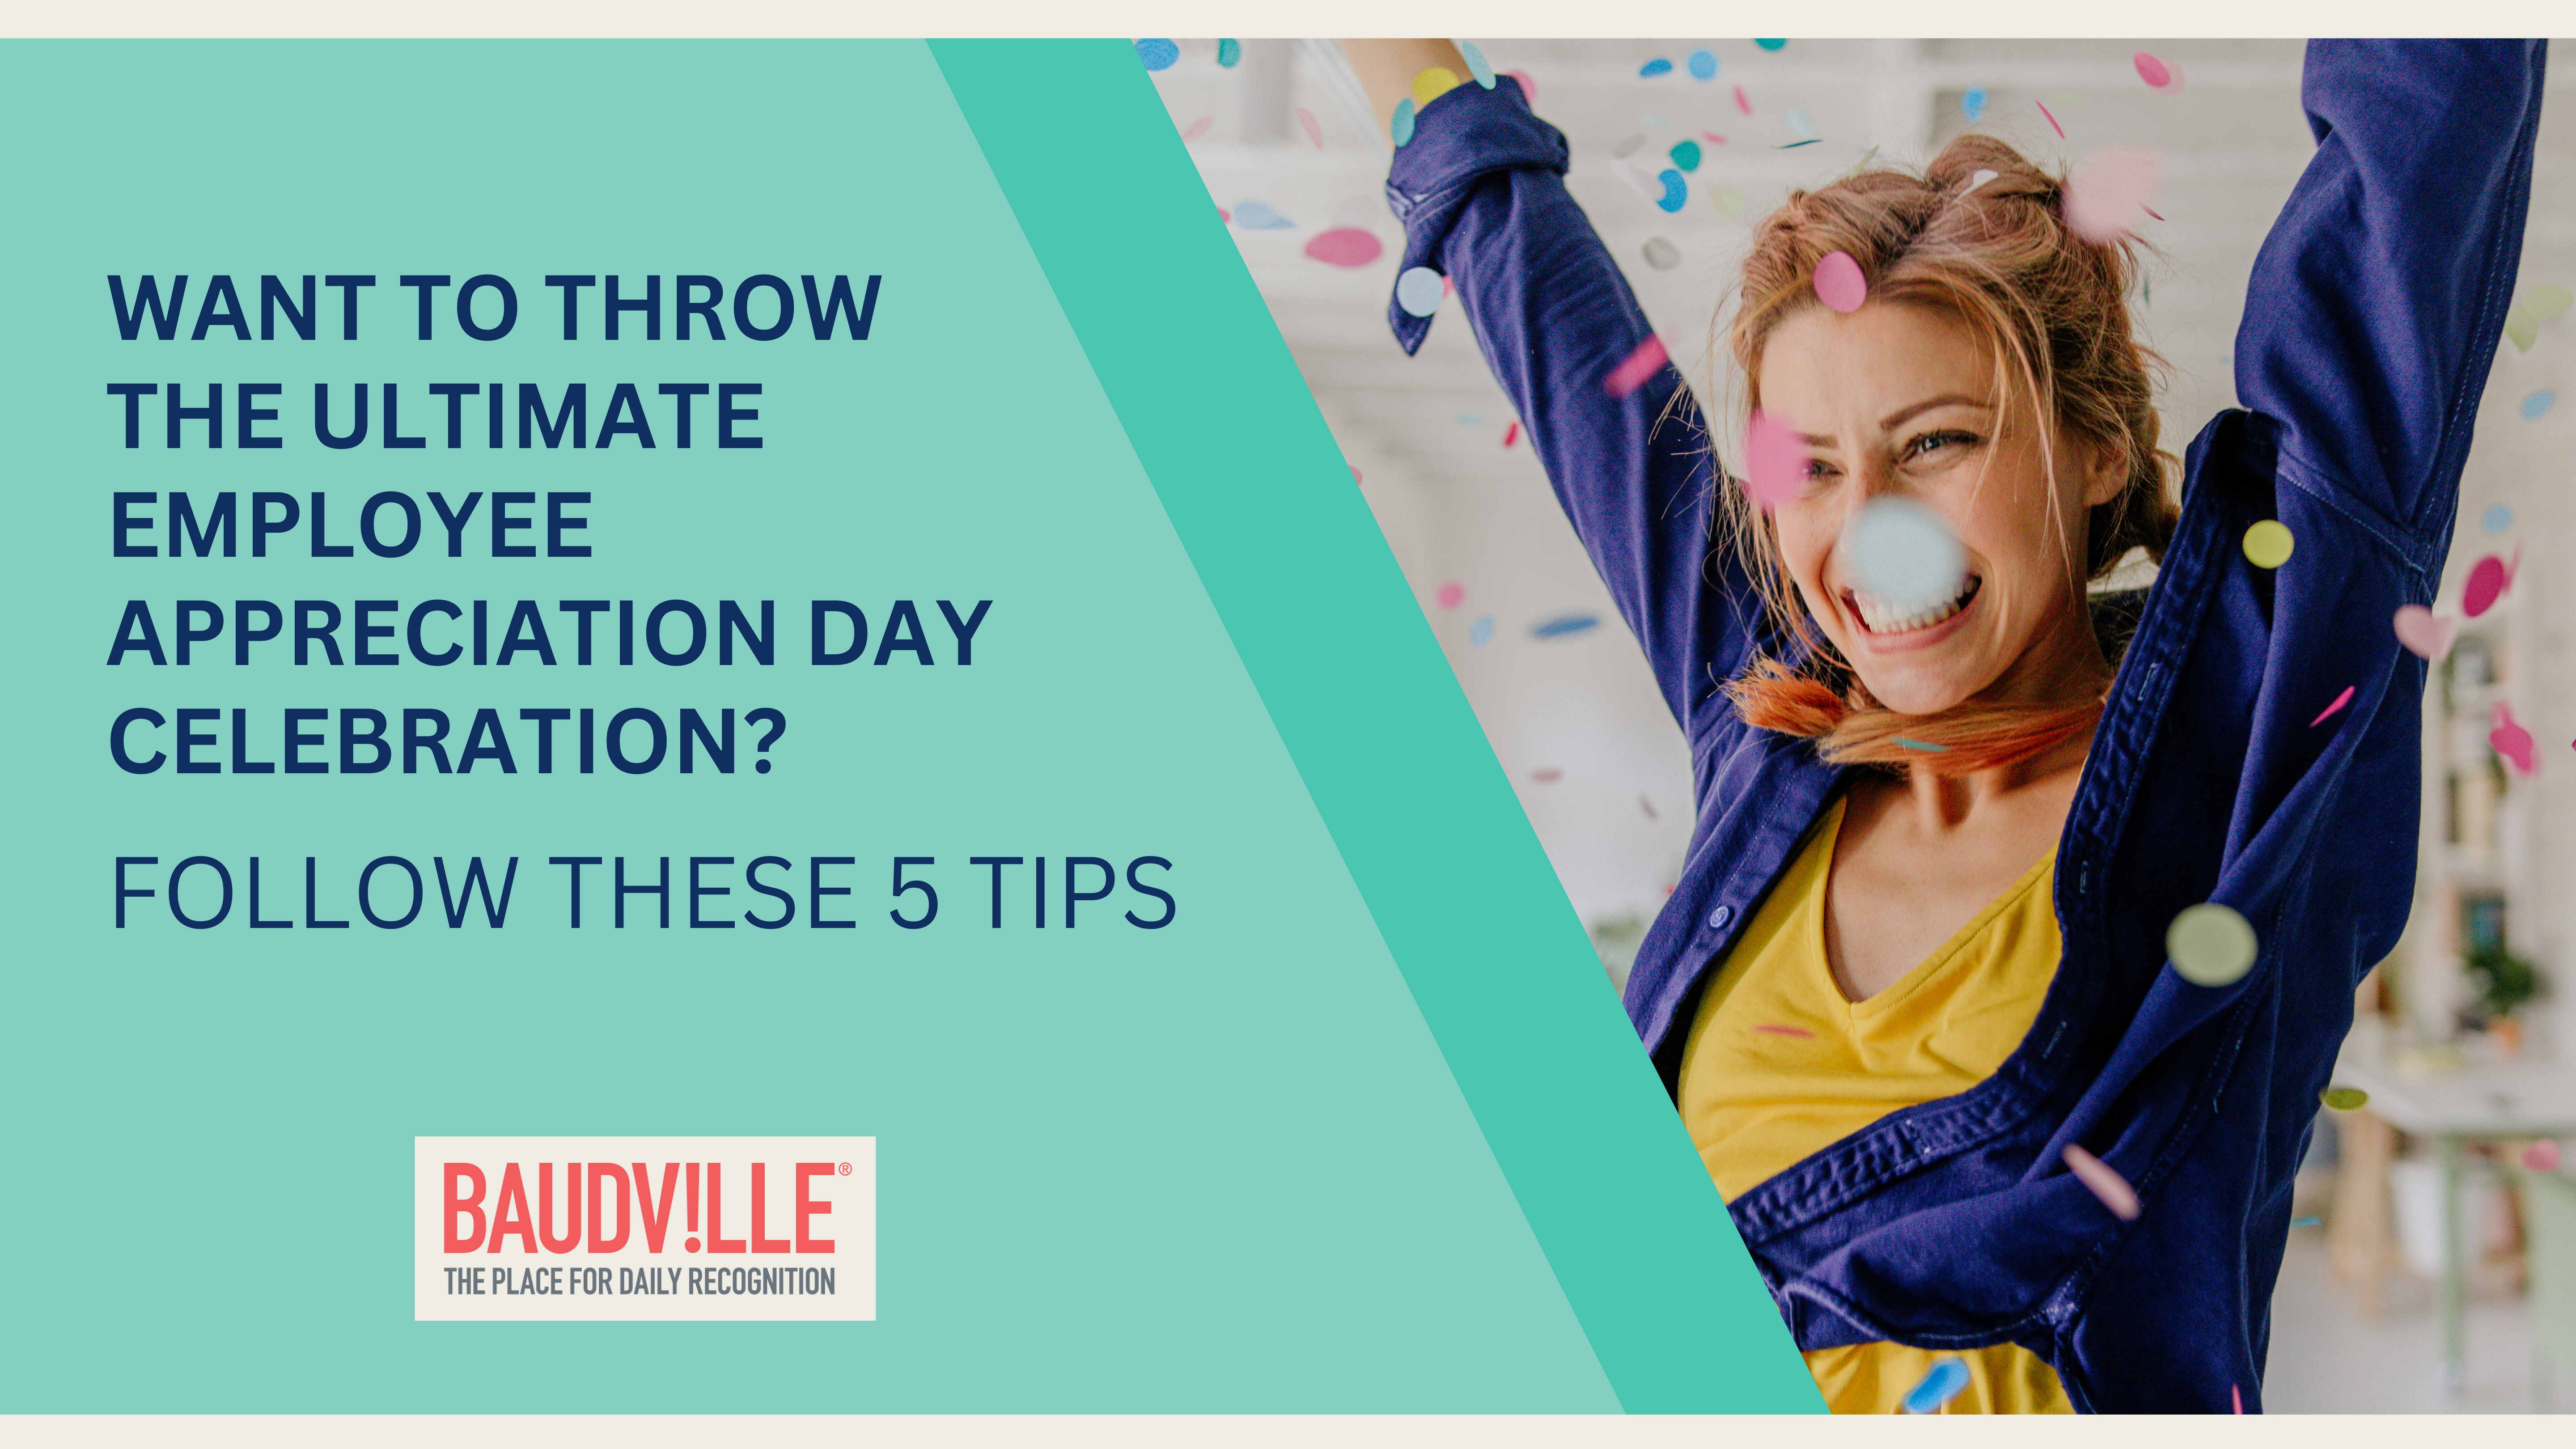 Want to Throw the Ultimate Employee Appreciation Day Celebration? Follow These 5 Tips!